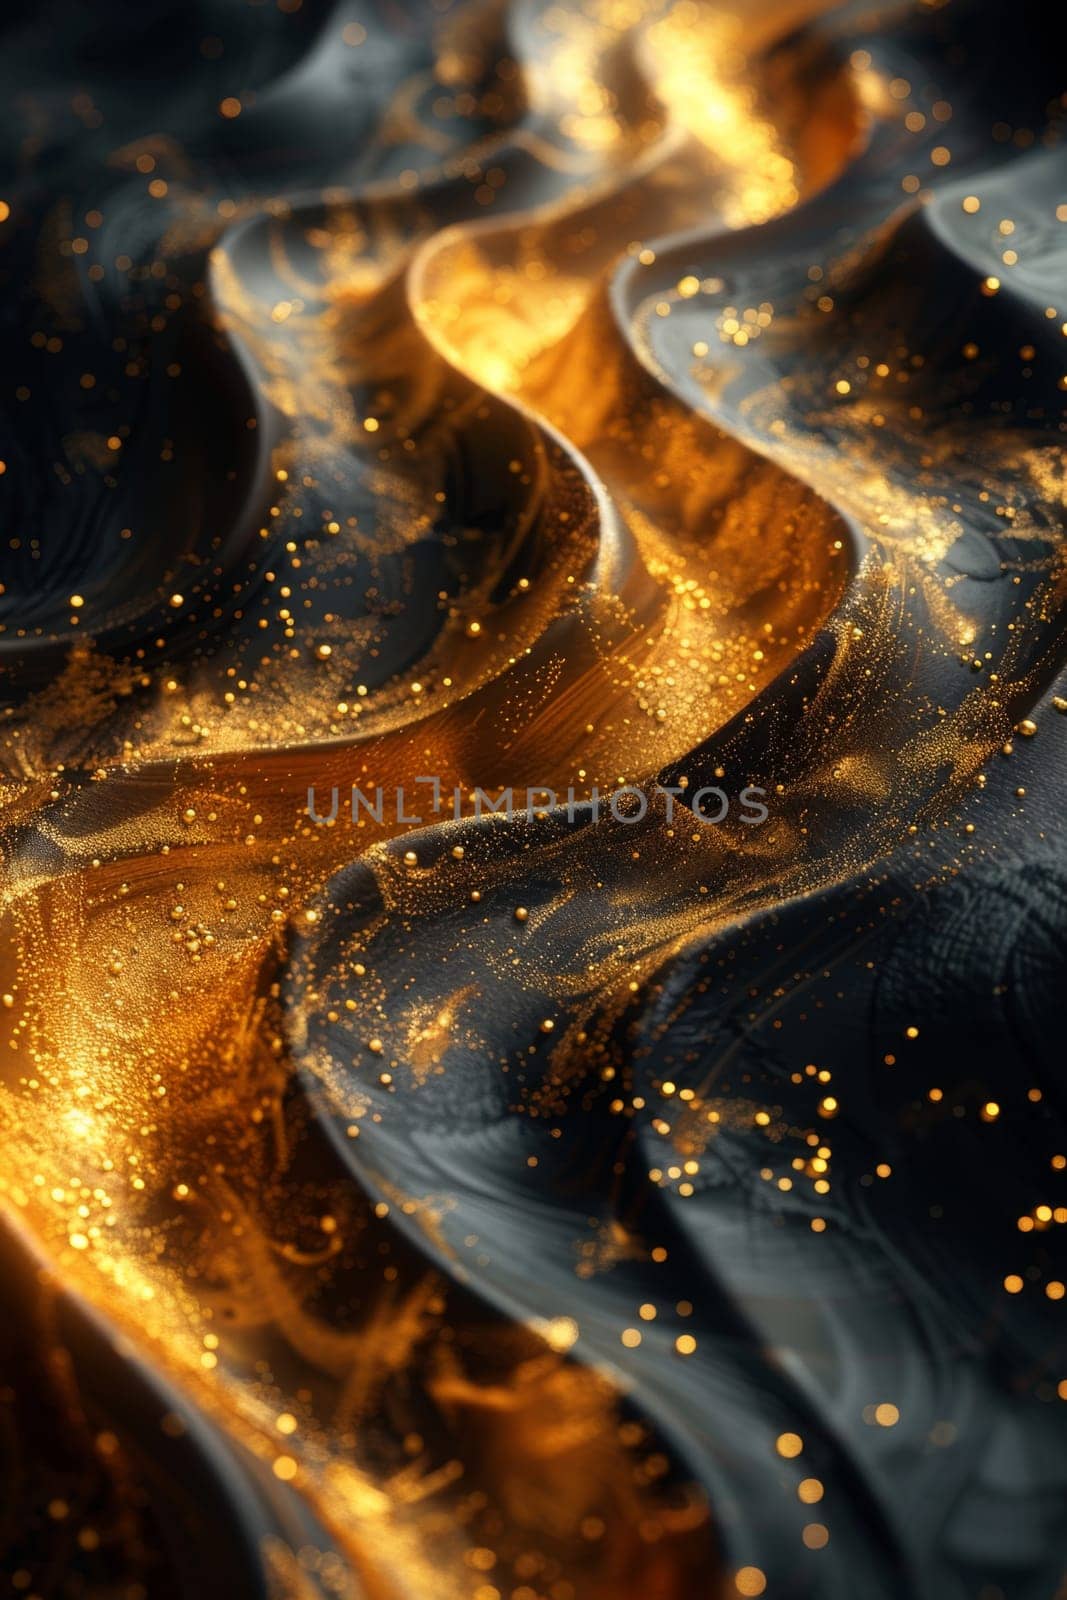 Abstract shiny design element in the form of golden wavy lines on a black background by Lobachad